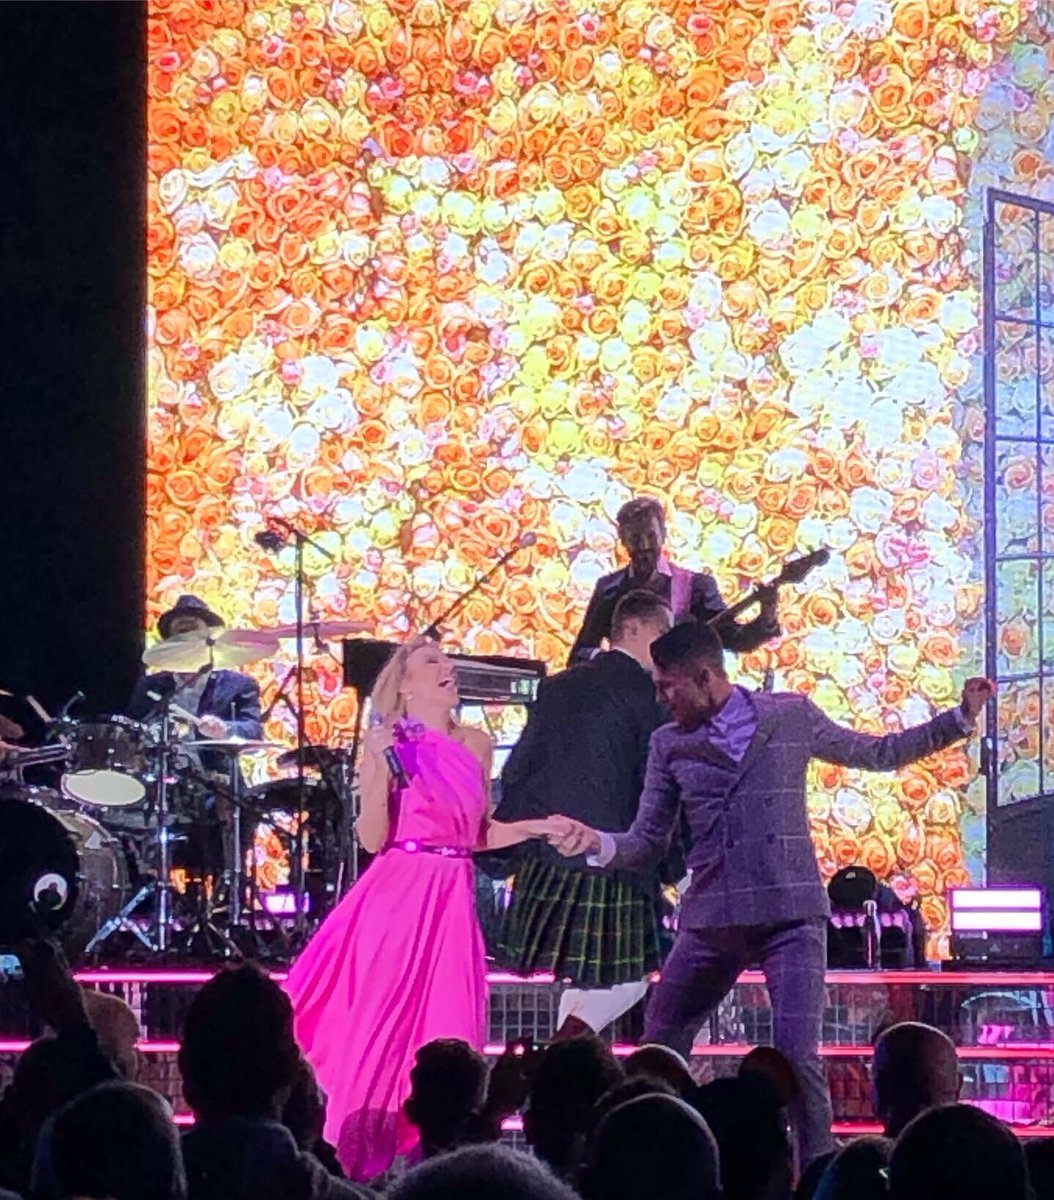 Twice as nice, Hampton Court Palace you were amazing! Thanks for 2 glorious nights! #Summer2019 https://t.co/nW2izaMKg7